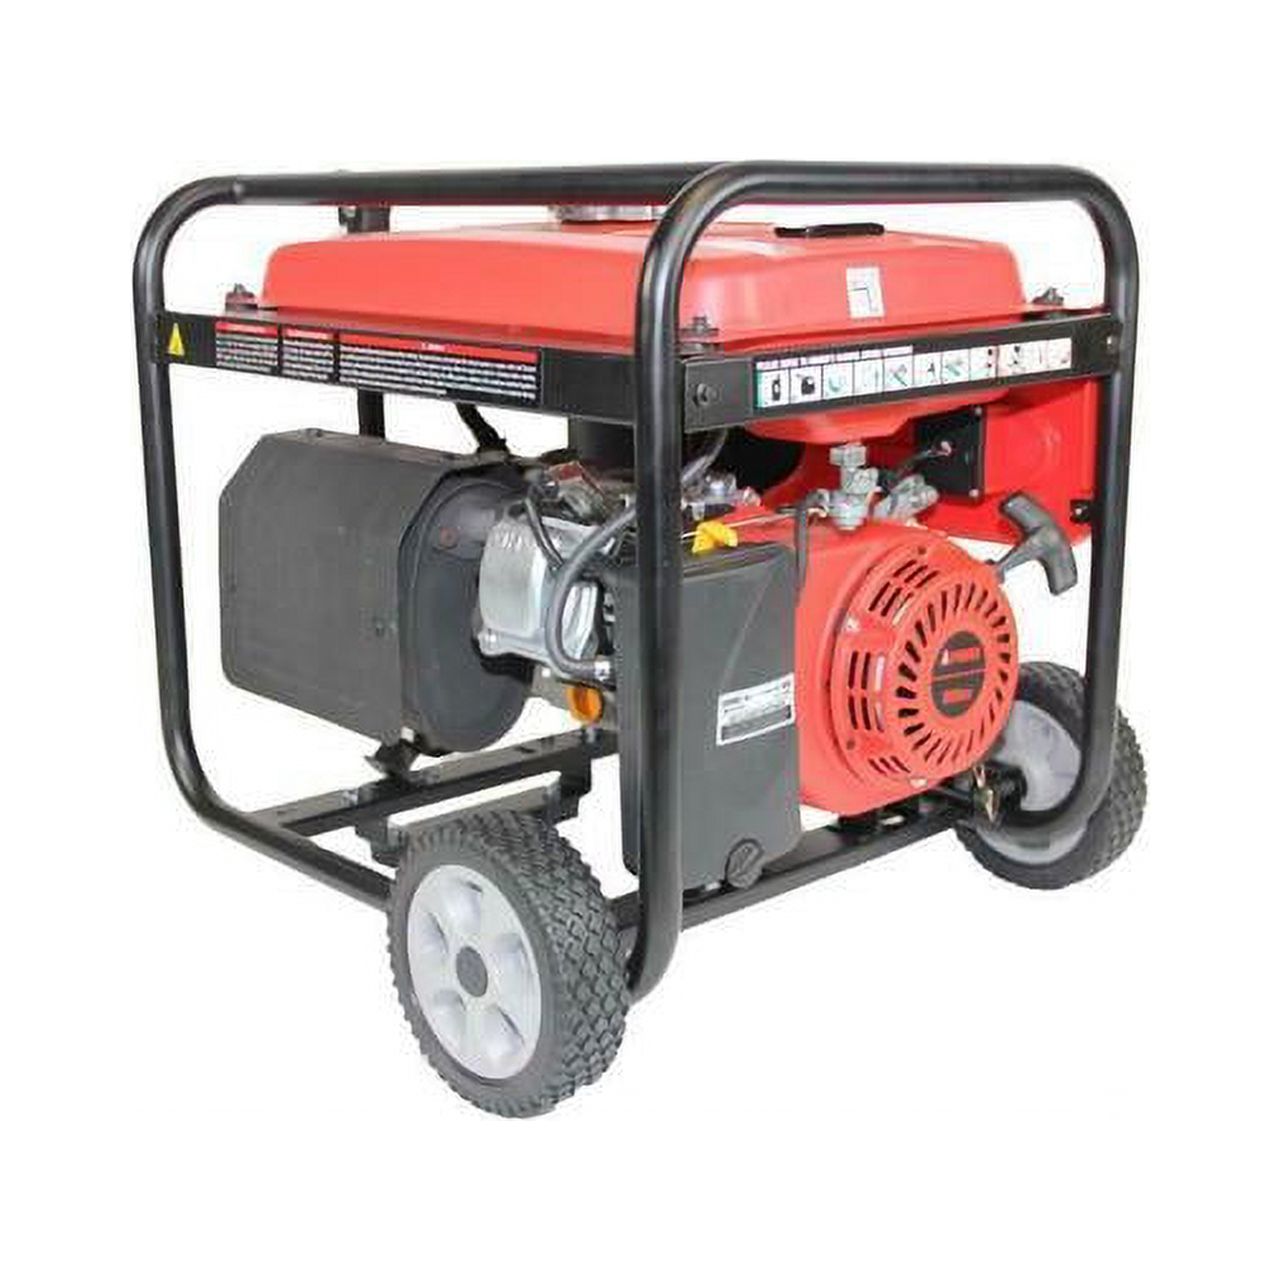 A-iPower AP5000 Gasoline Portable Generator W/ 5000W Starting Watts - image 5 of 5